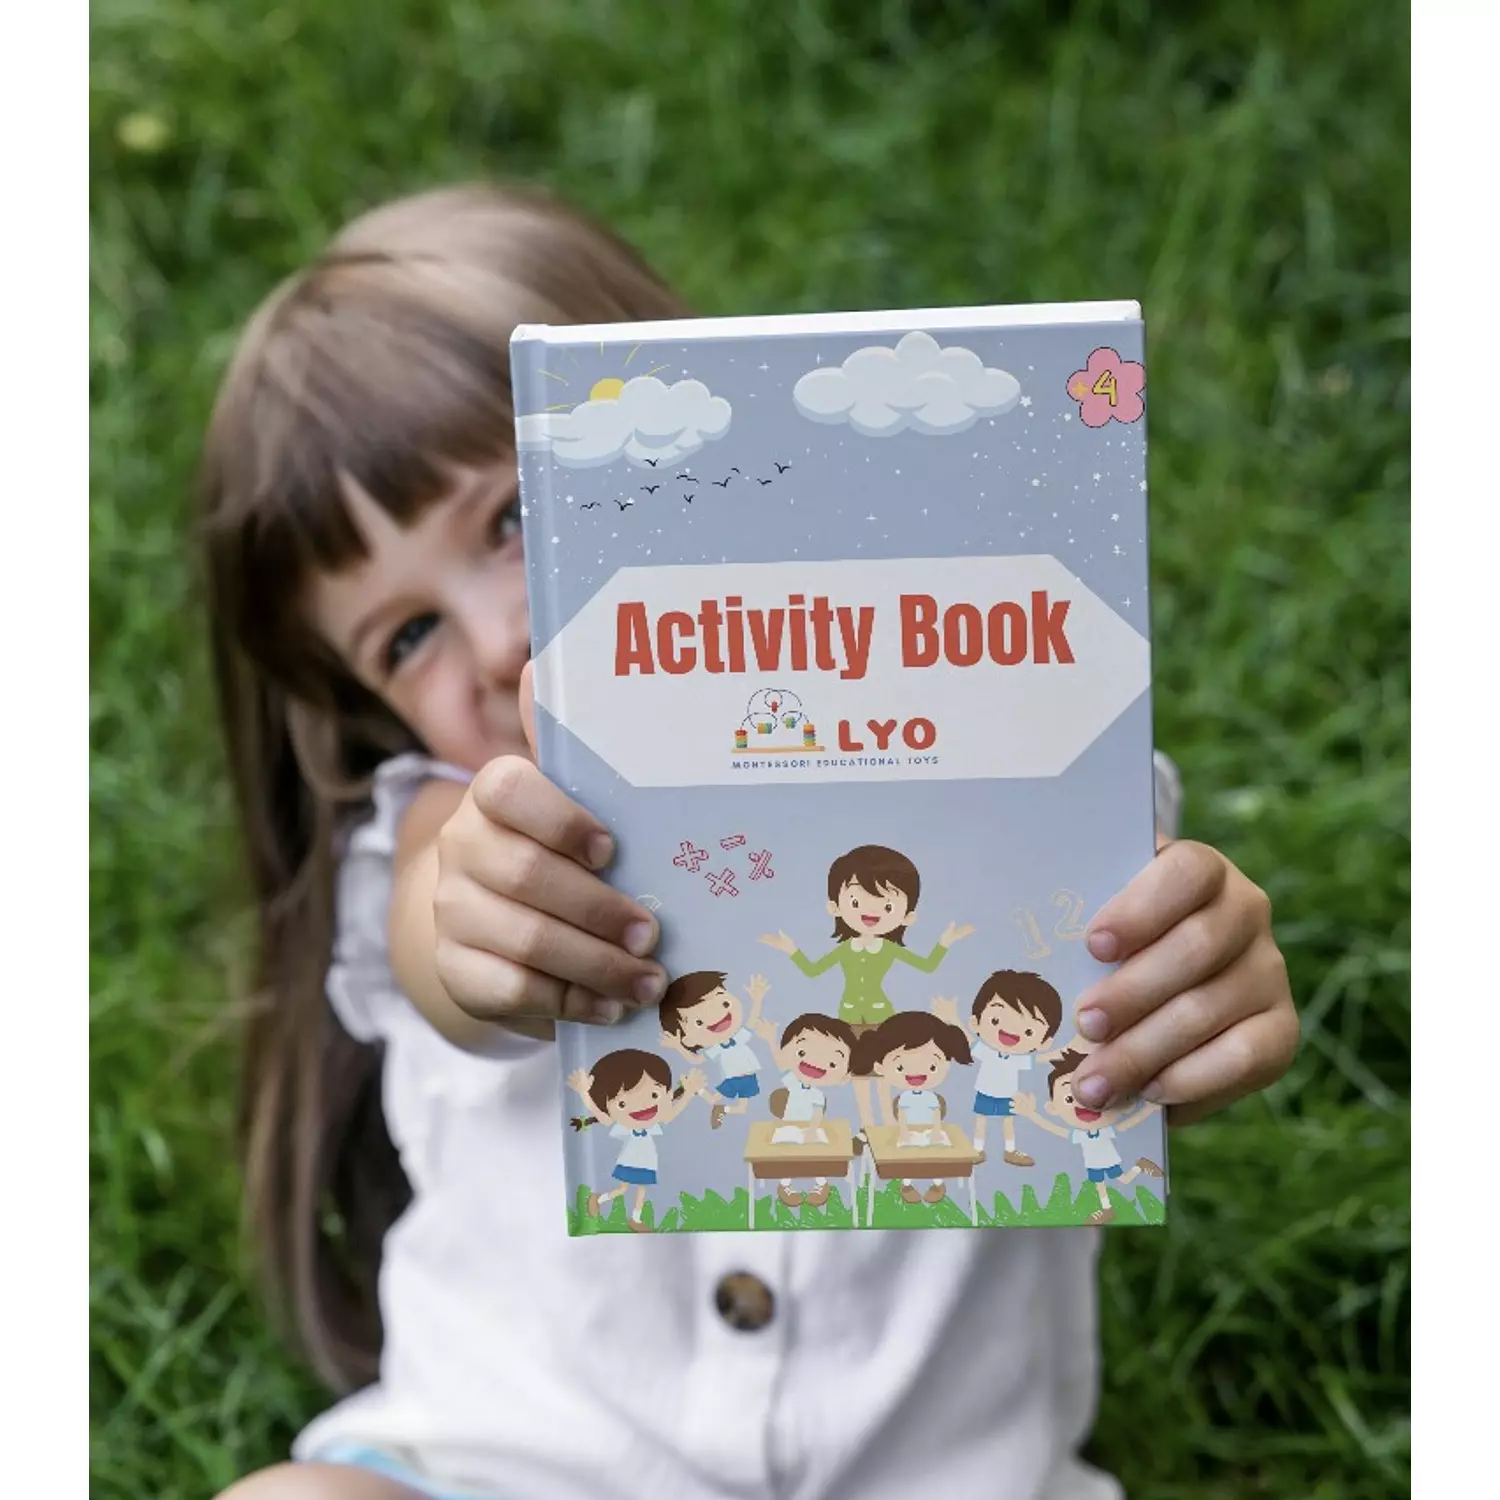 Activity Book hover image